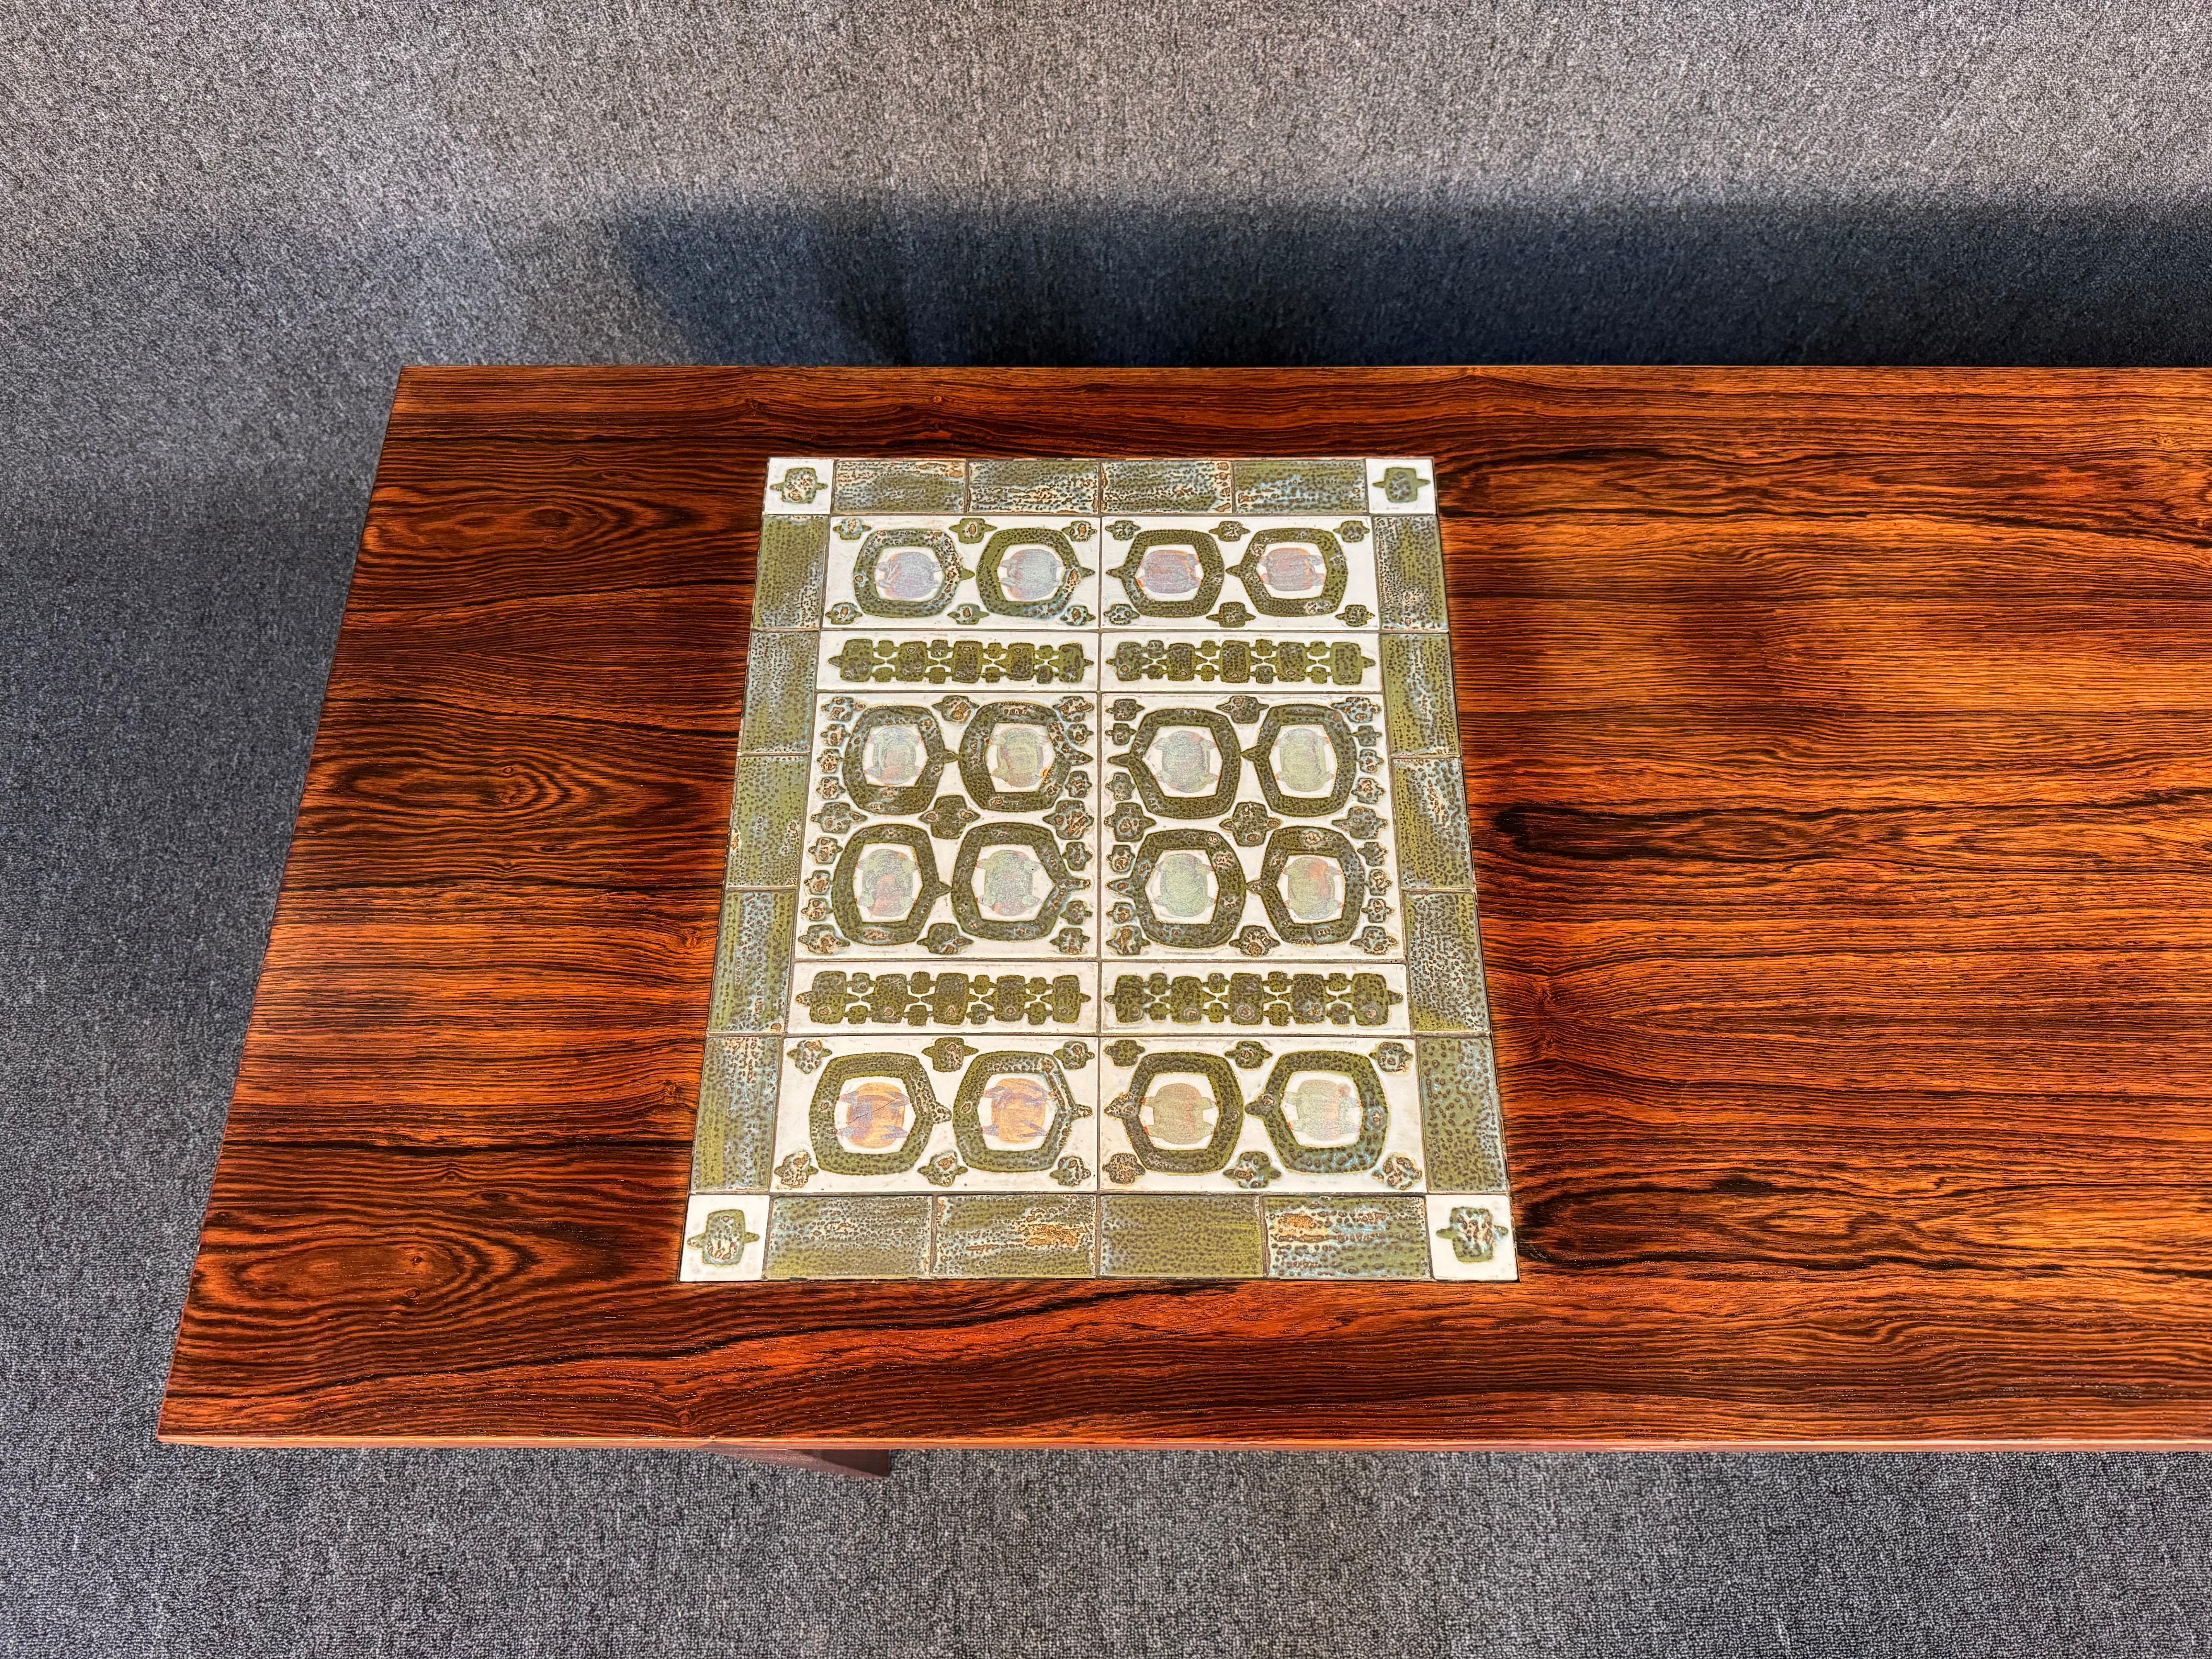 Here is a beautiful scandinavian modern cocktail table in rosewood with ceramic tile insert designed by Severin Hansen and manufactured by Haslev Mobelfabrik in Denmark in the 1960's.
This lovely coffee table, recently imported from Europe to